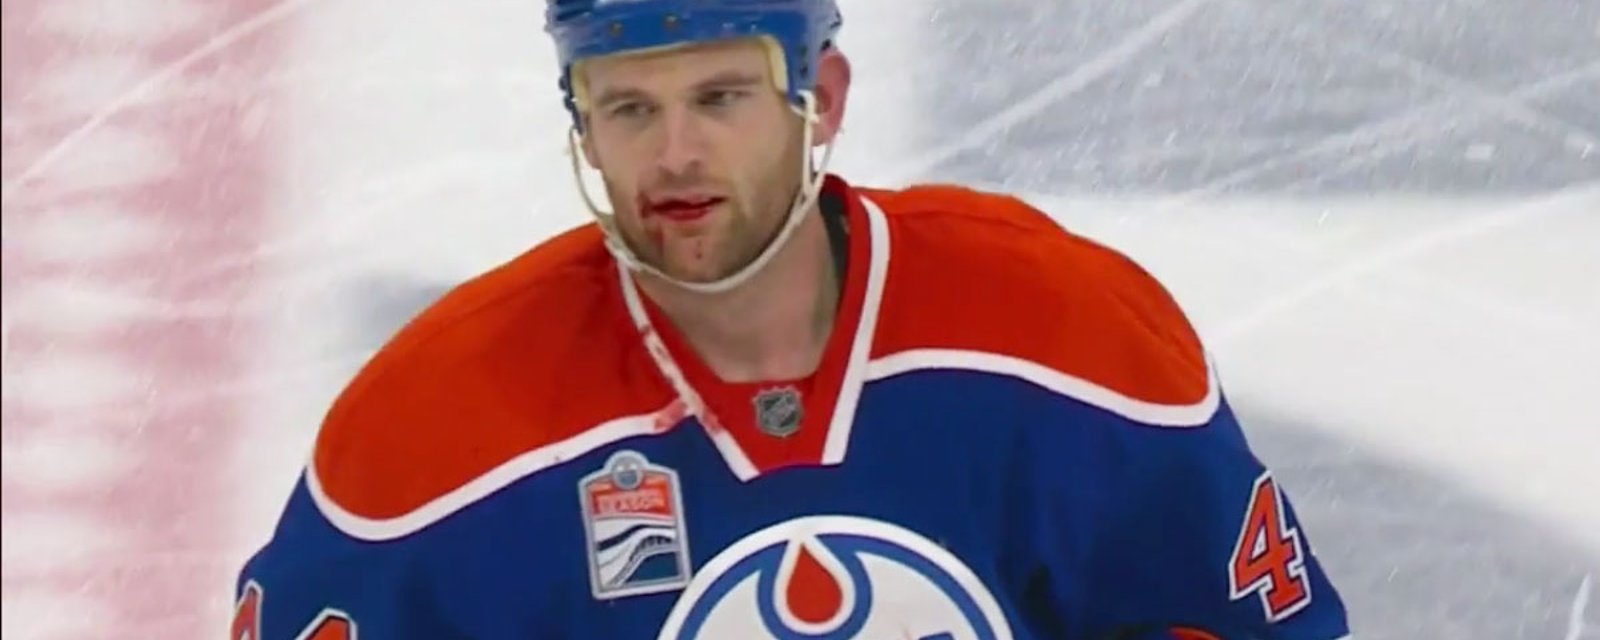 Must See: Zach Kassian “warm welcome” for Taylor Hall